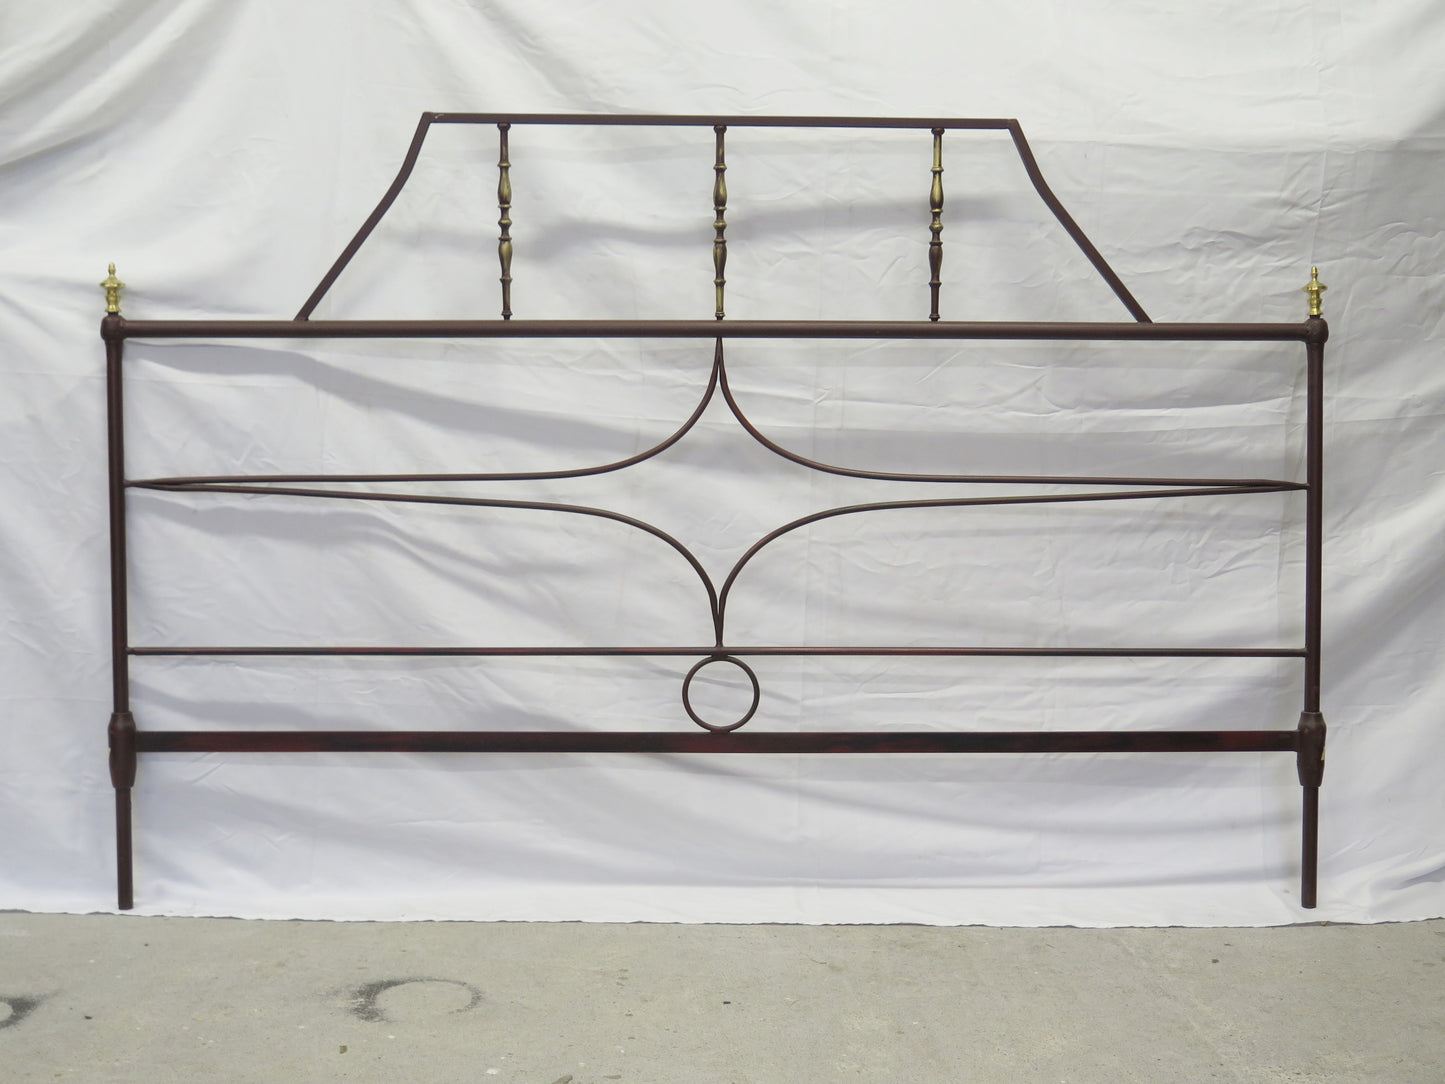 VINTAGE HAND FORGED WROUGHT IRON HEADBOARD FOR DOUBLE BED 61 CH